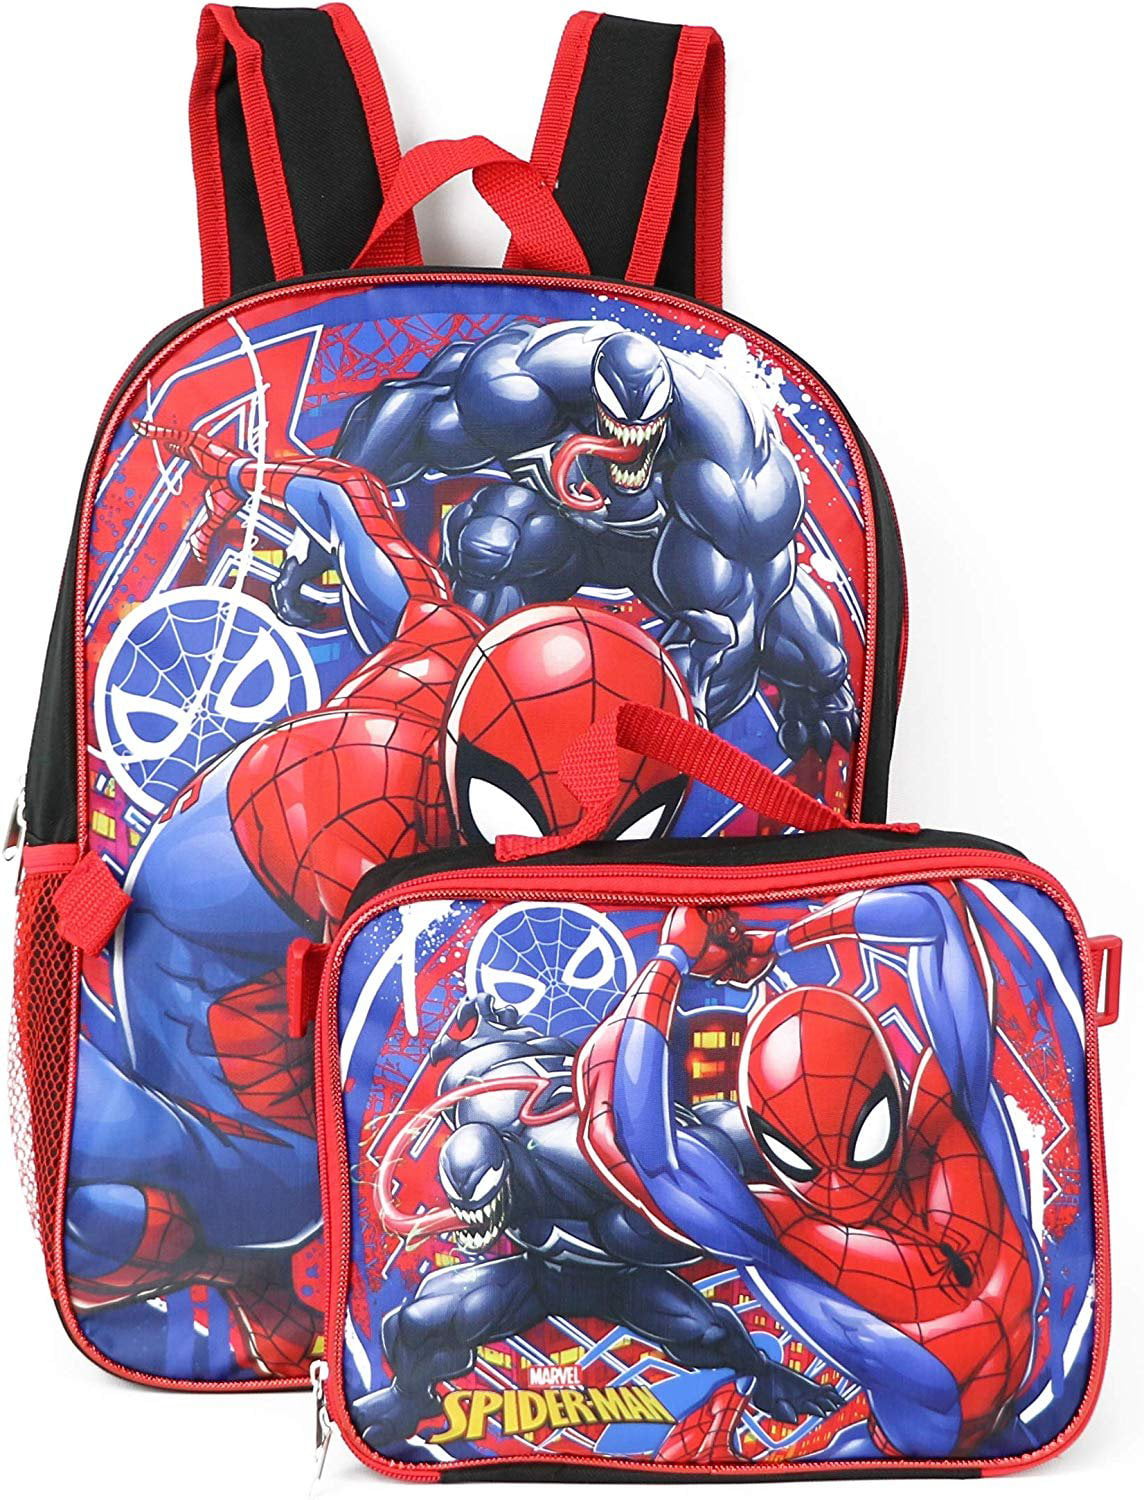 Marvel Avengers Boys School Backpack Lunch Box Book Bag 5 Piece SET Toy Gift Kid 